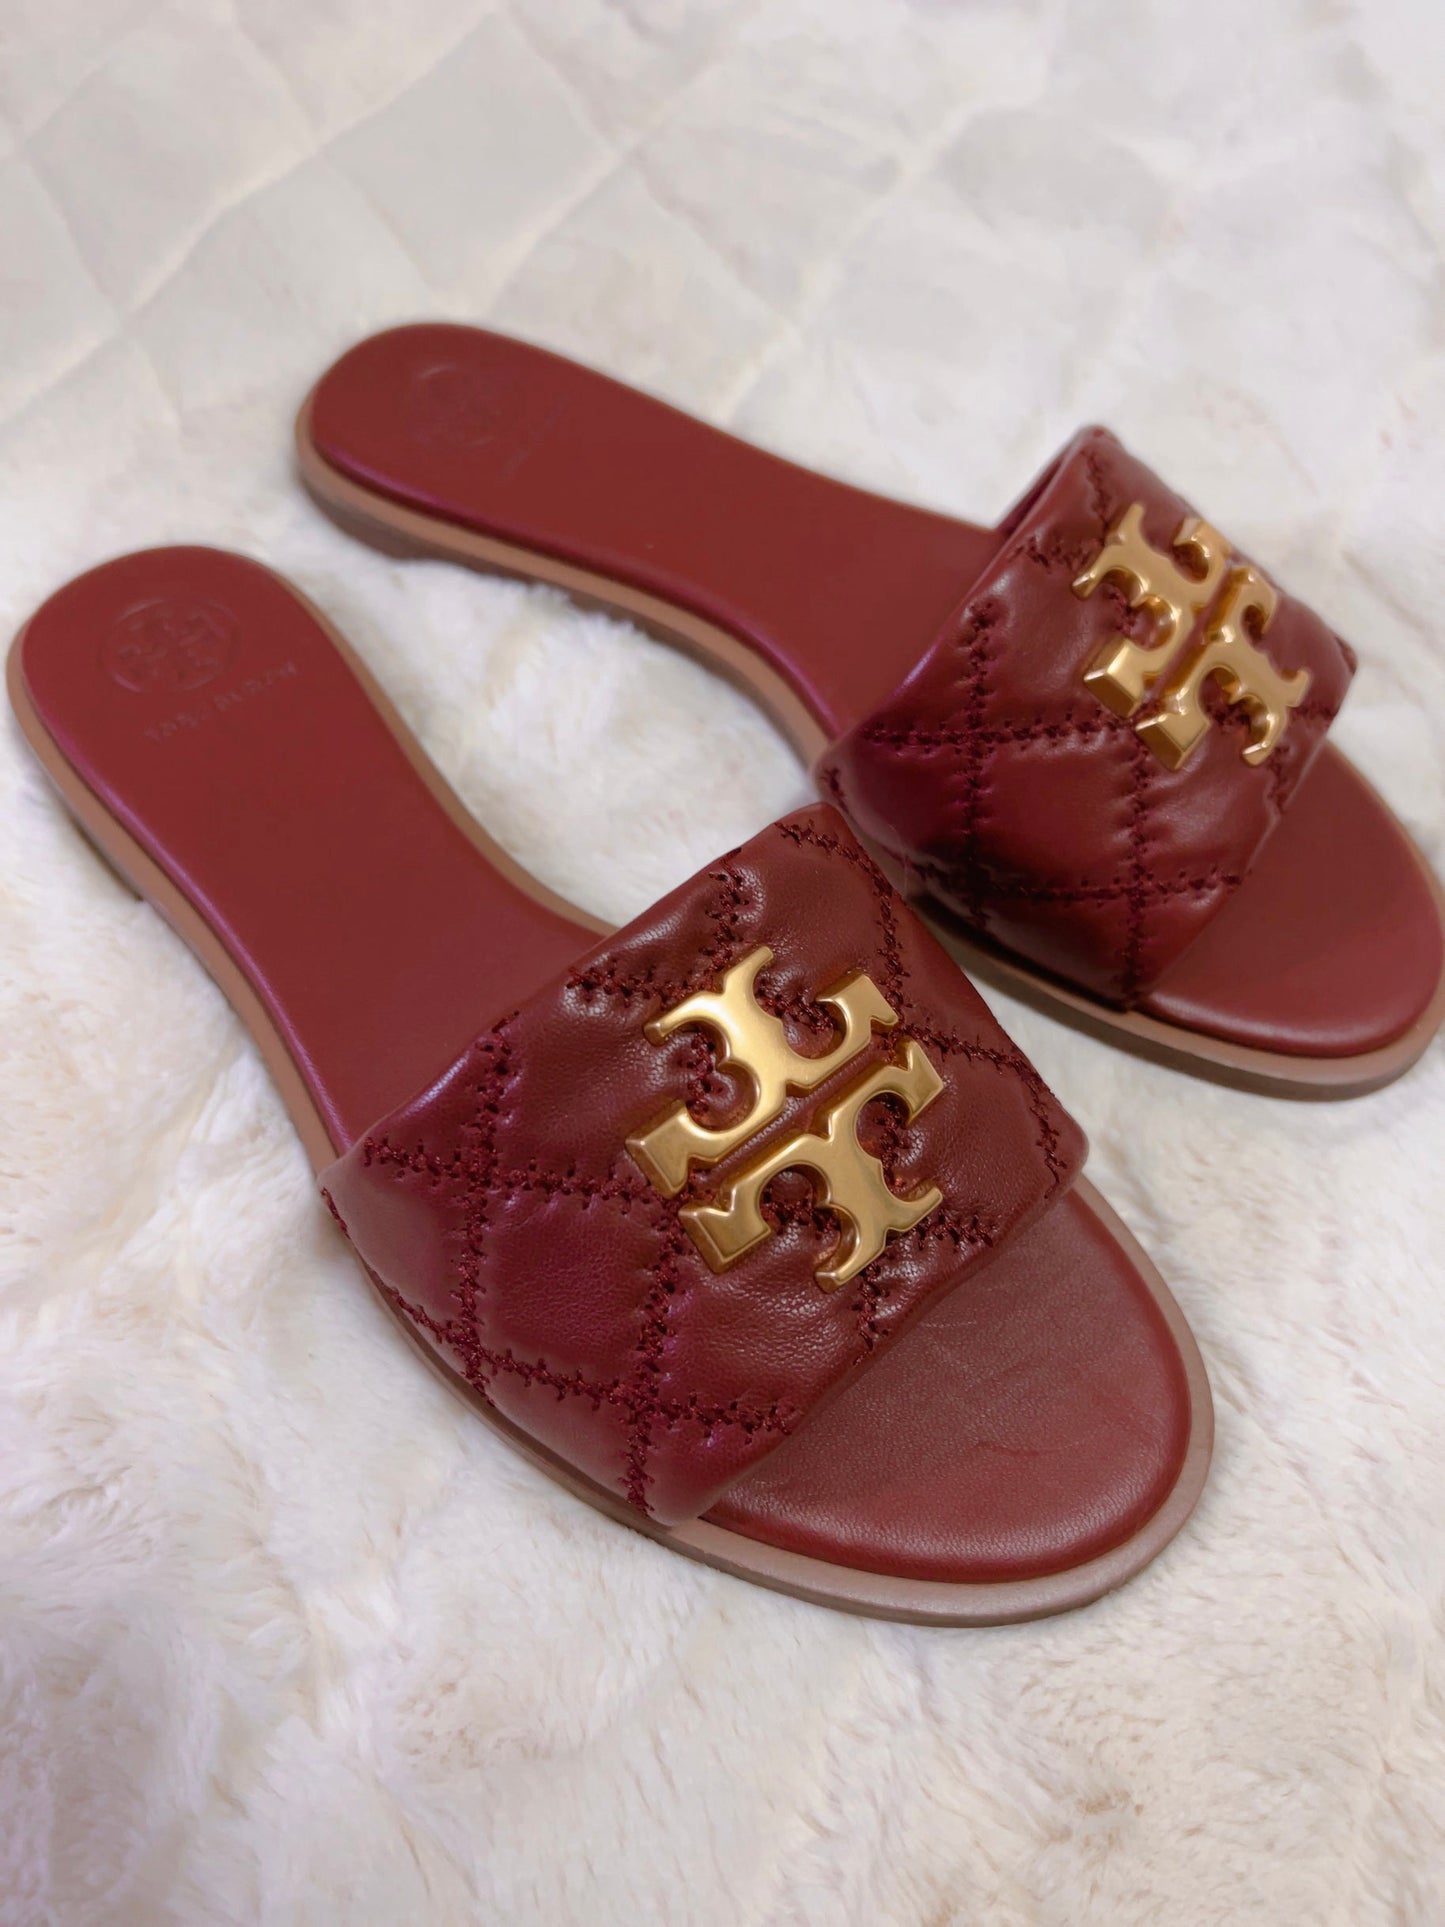 Tory Burch Everly Slide Sandals, Quilted Nappa Leather, Roma Red, Size 7.5